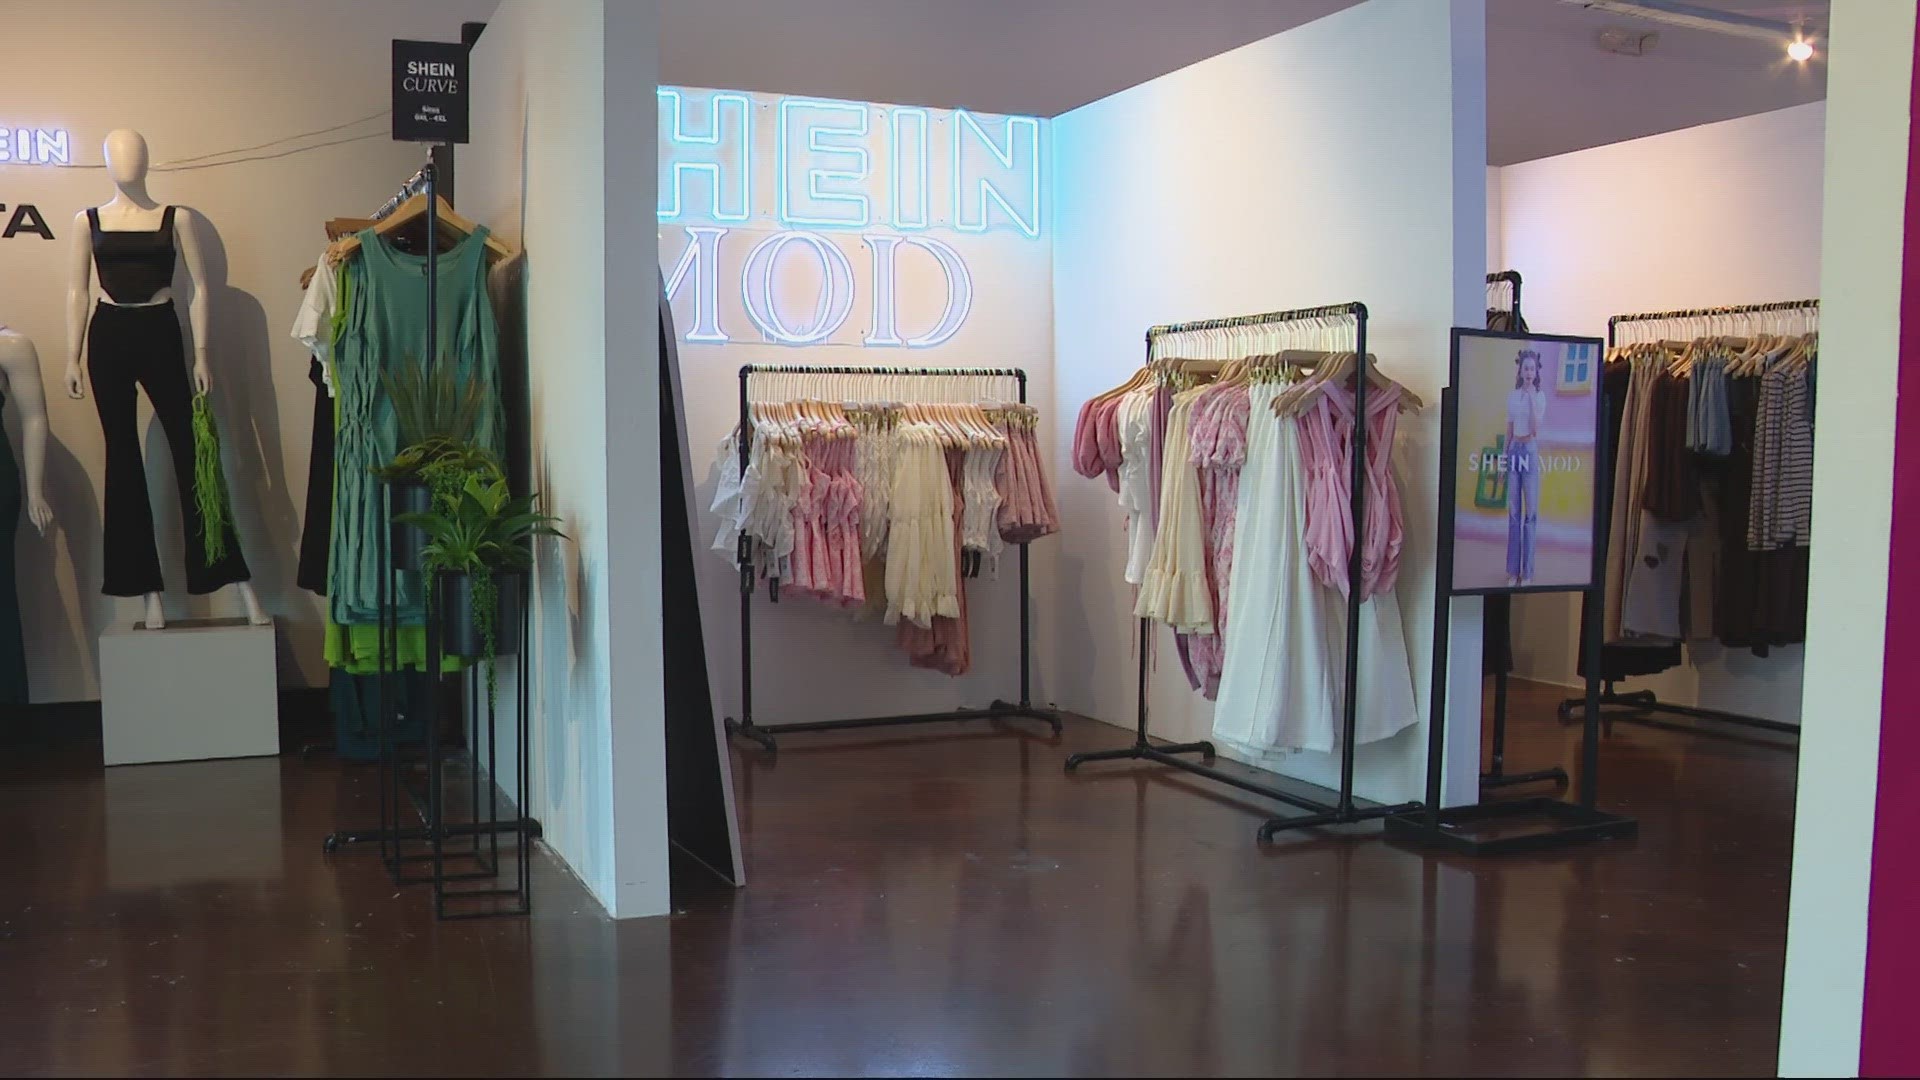 Fast-fashion retailer Shein has a pop up in Indianapolis.